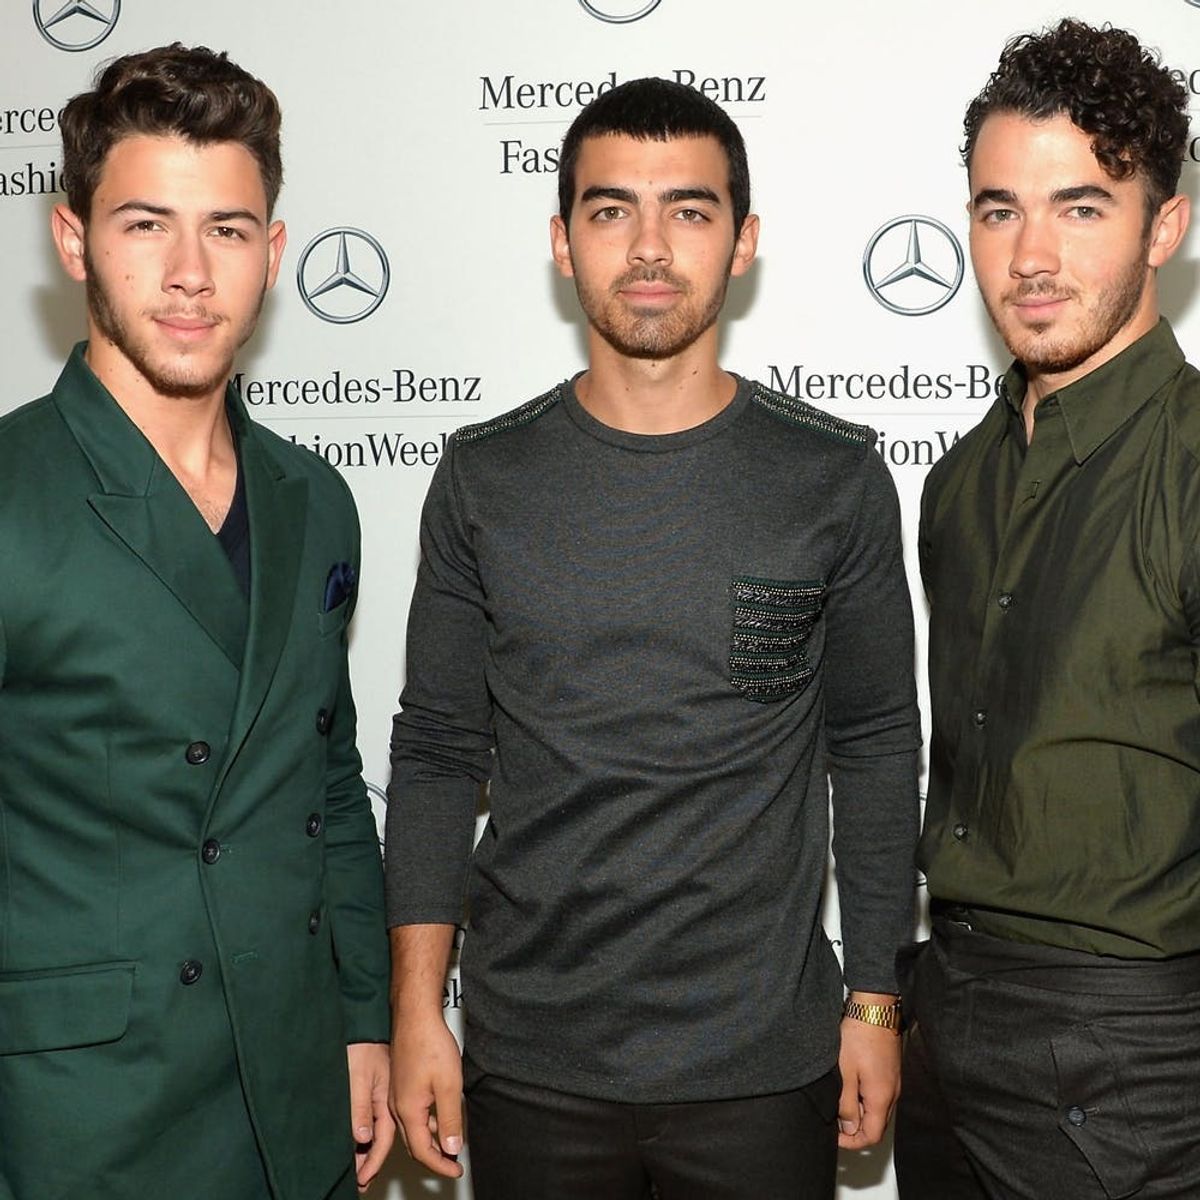 Here’s the Photographic Proof That a Jonas Brothers Reunion Could Be on the Way